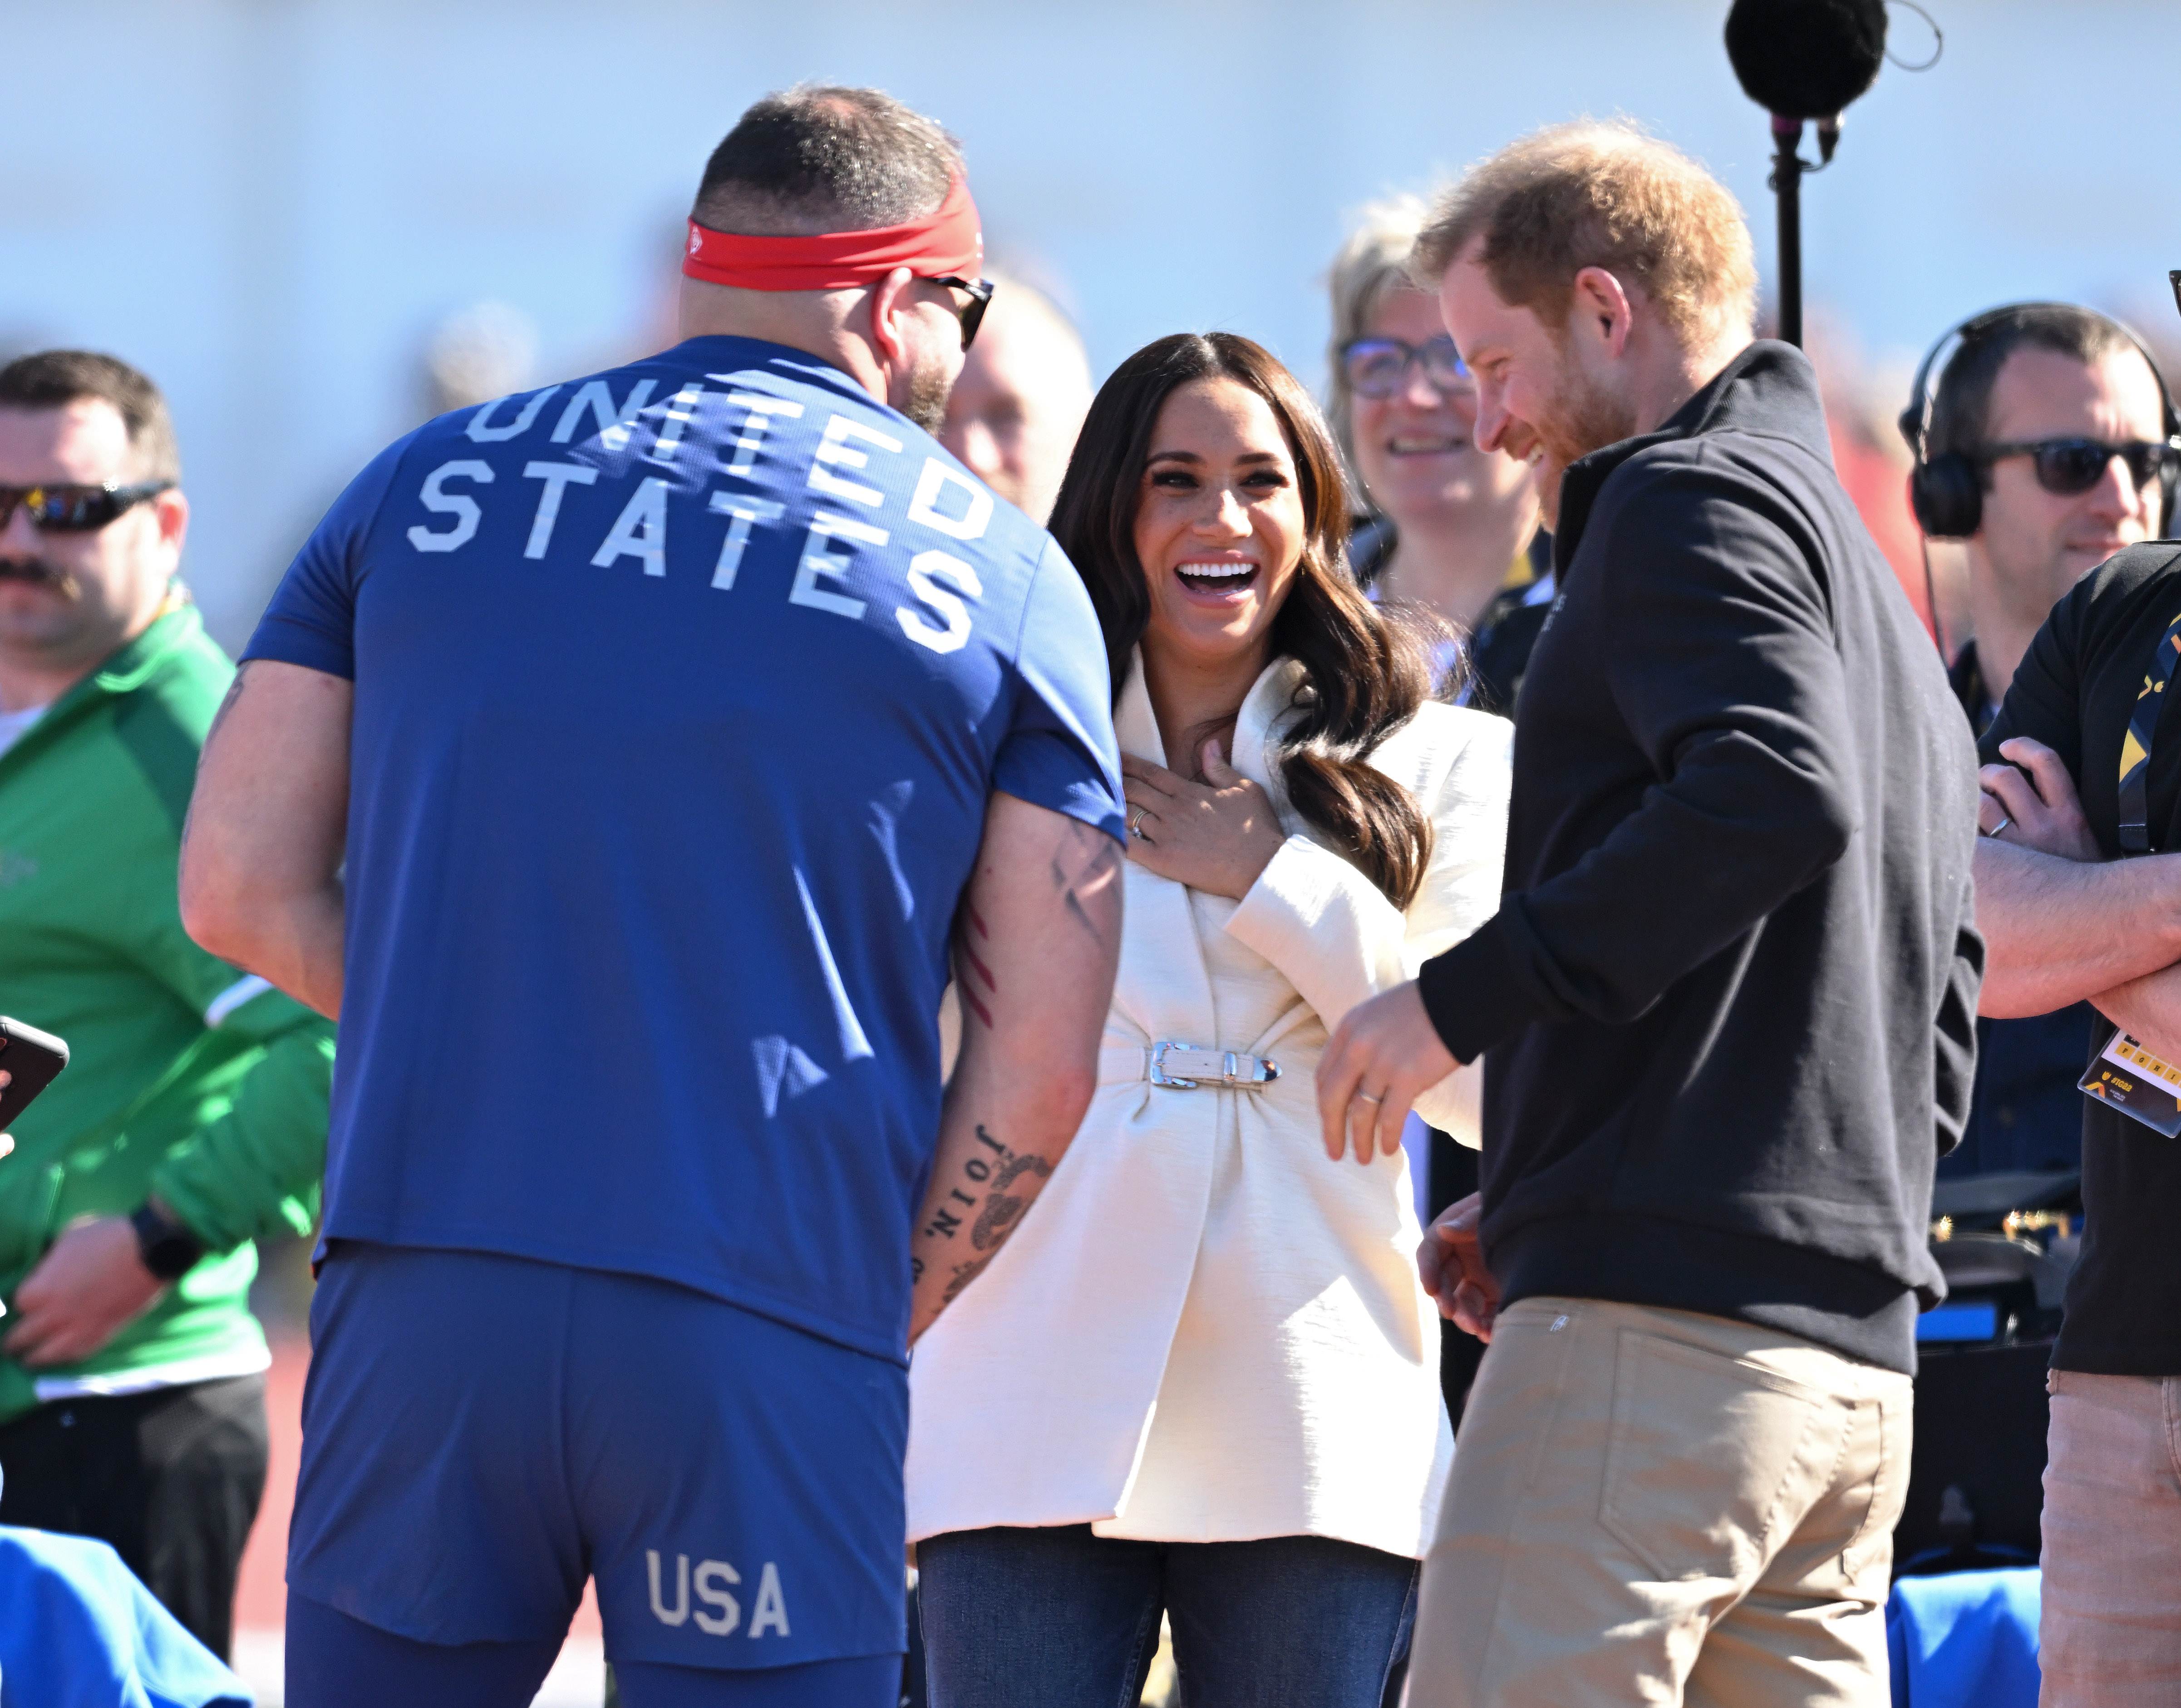 Prince Harry and Meghan Markle laughing with U.S. athlete at Invictus Games 